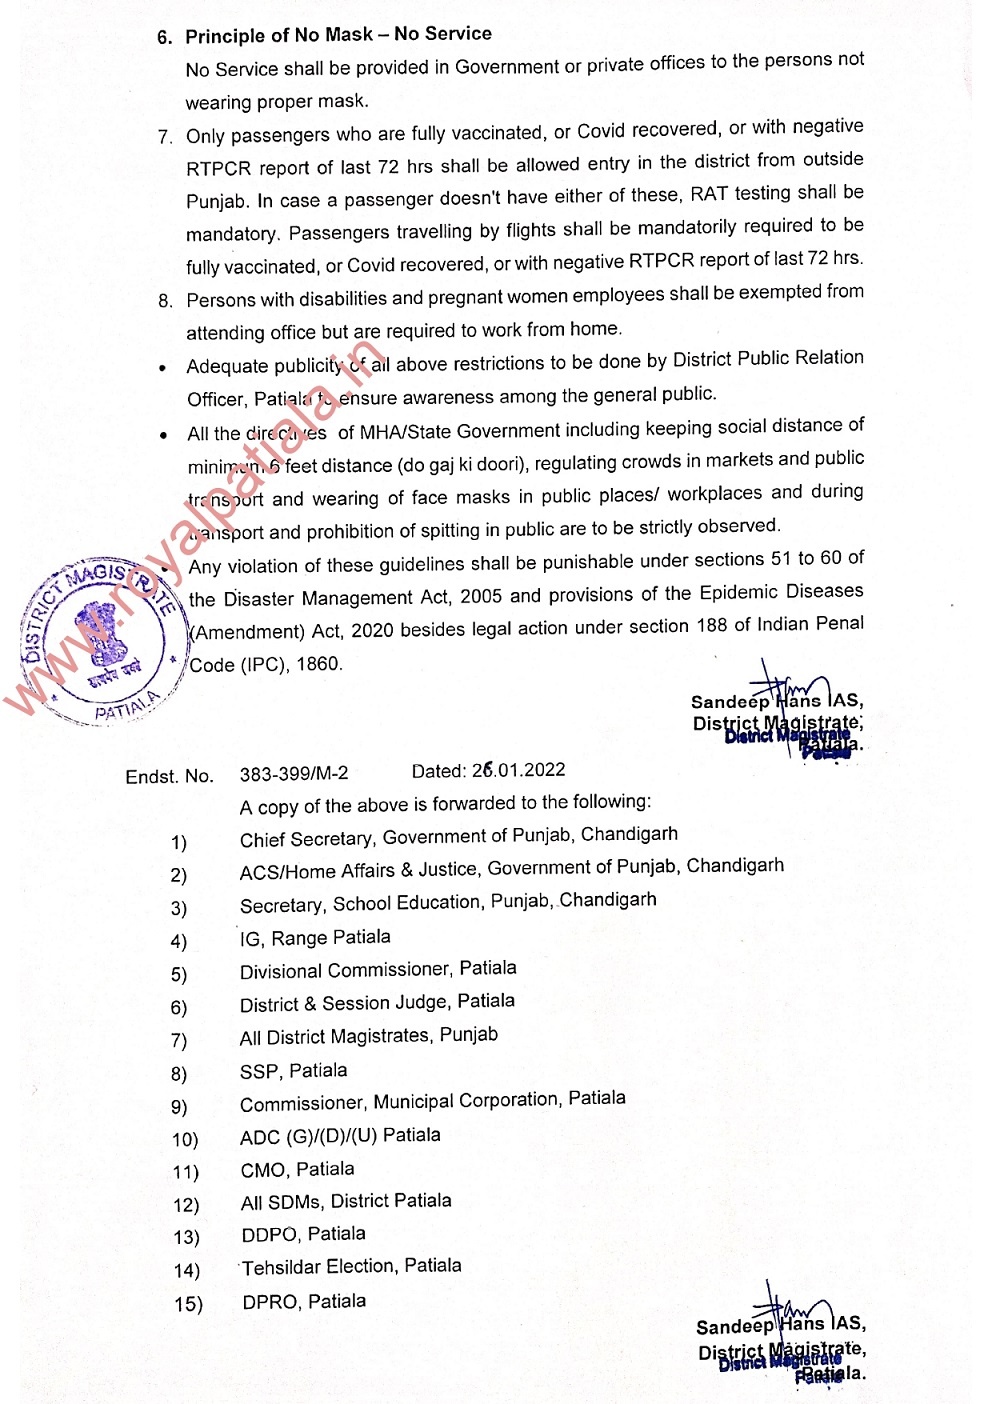 Deputy Commissioner Patiala issues new Covid restrictions